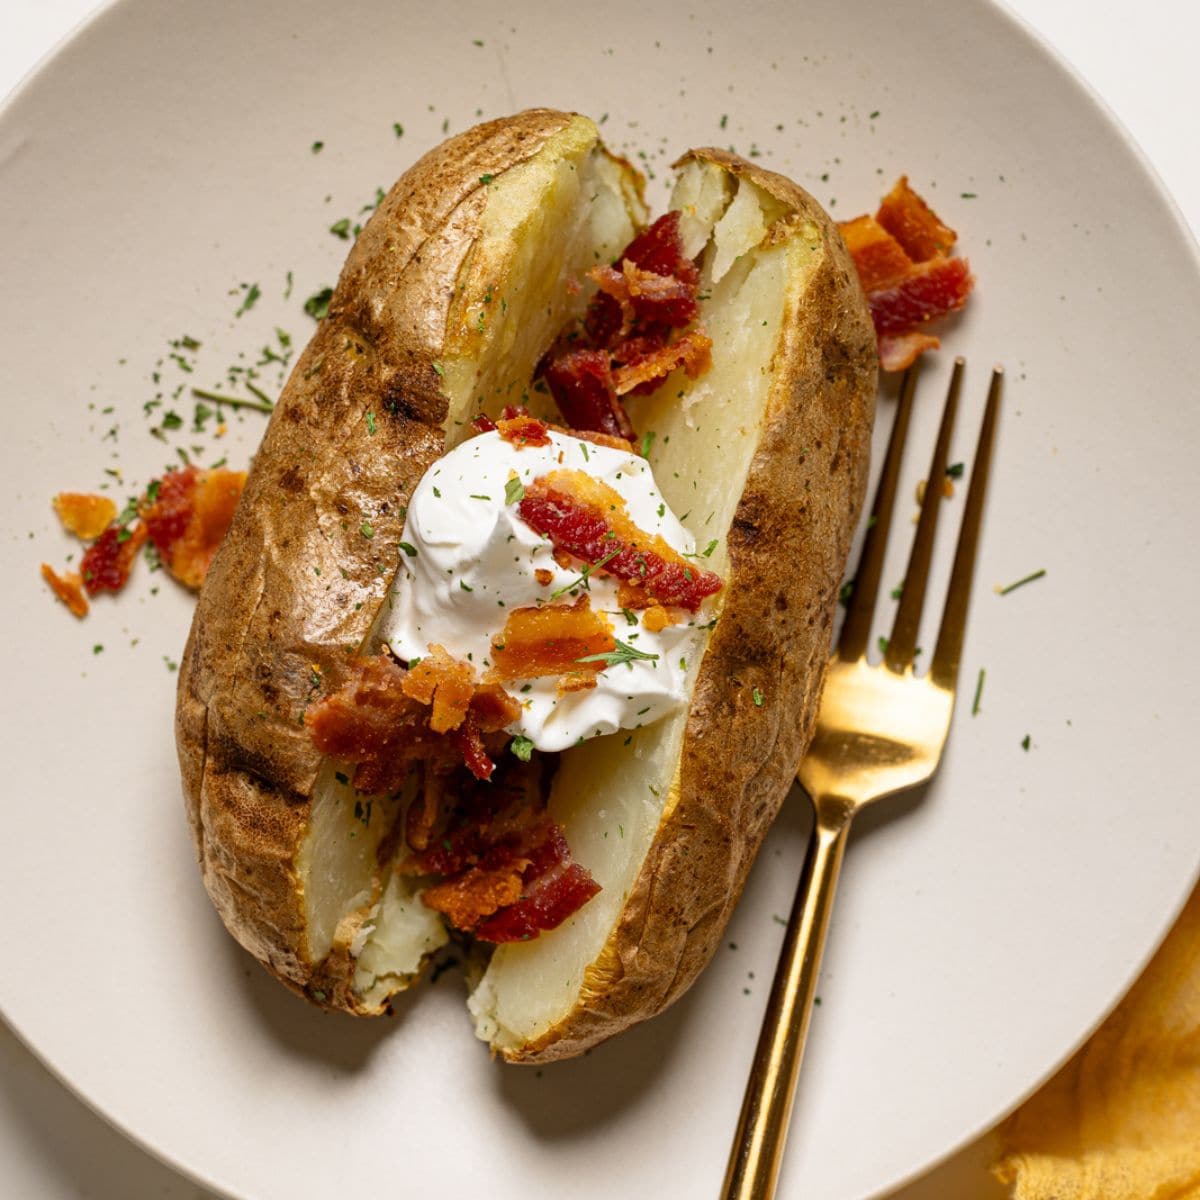 Baked potato on a white plate with a fork topped with bacon and sour cream.